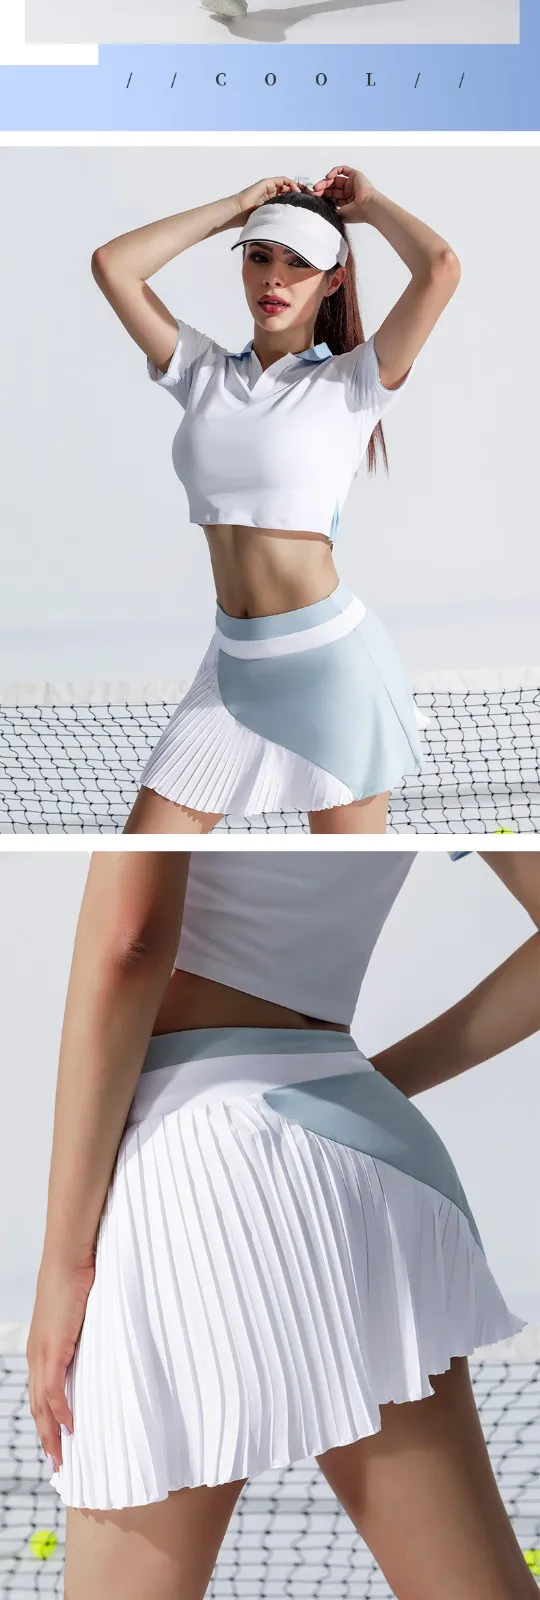 soft tennis outfit woman solutions for sport